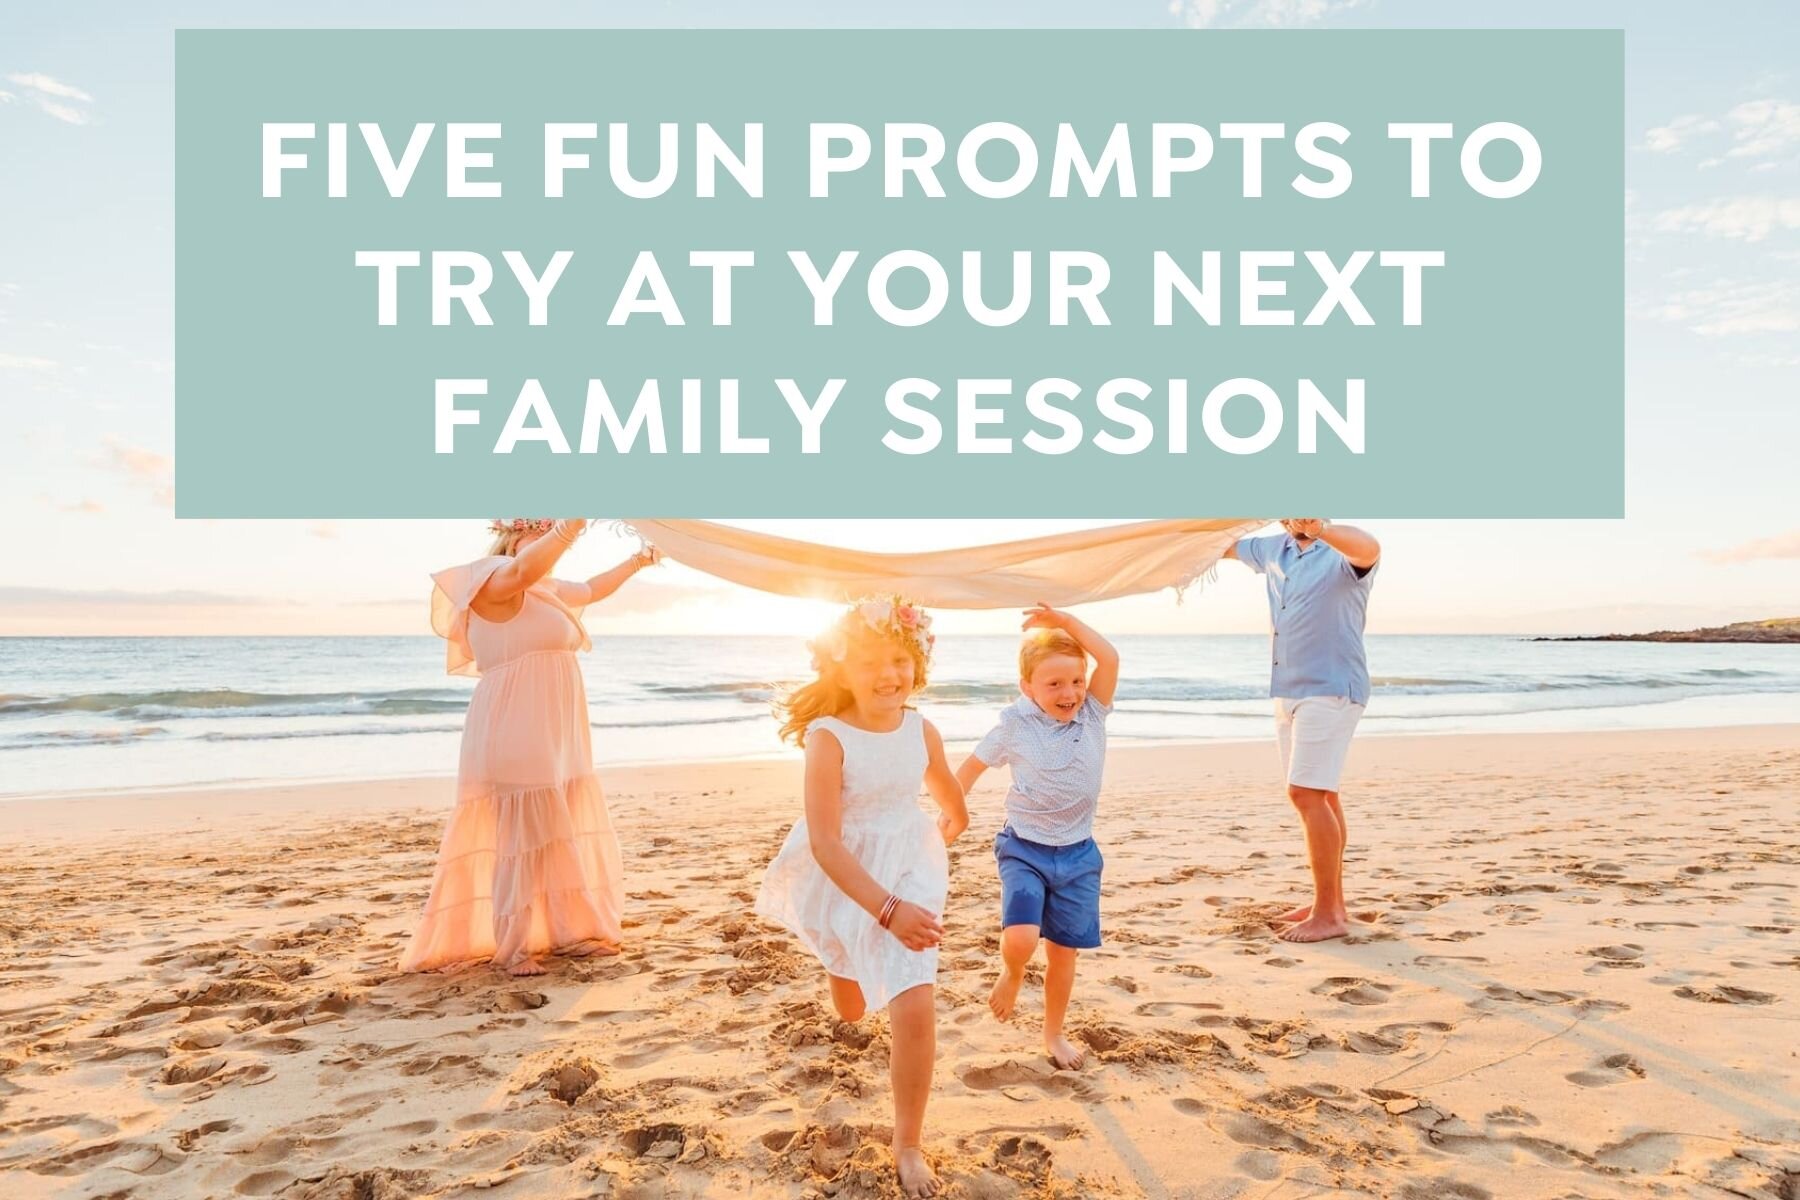 For Photographers: Five fun prompts and games you can try at your next family session